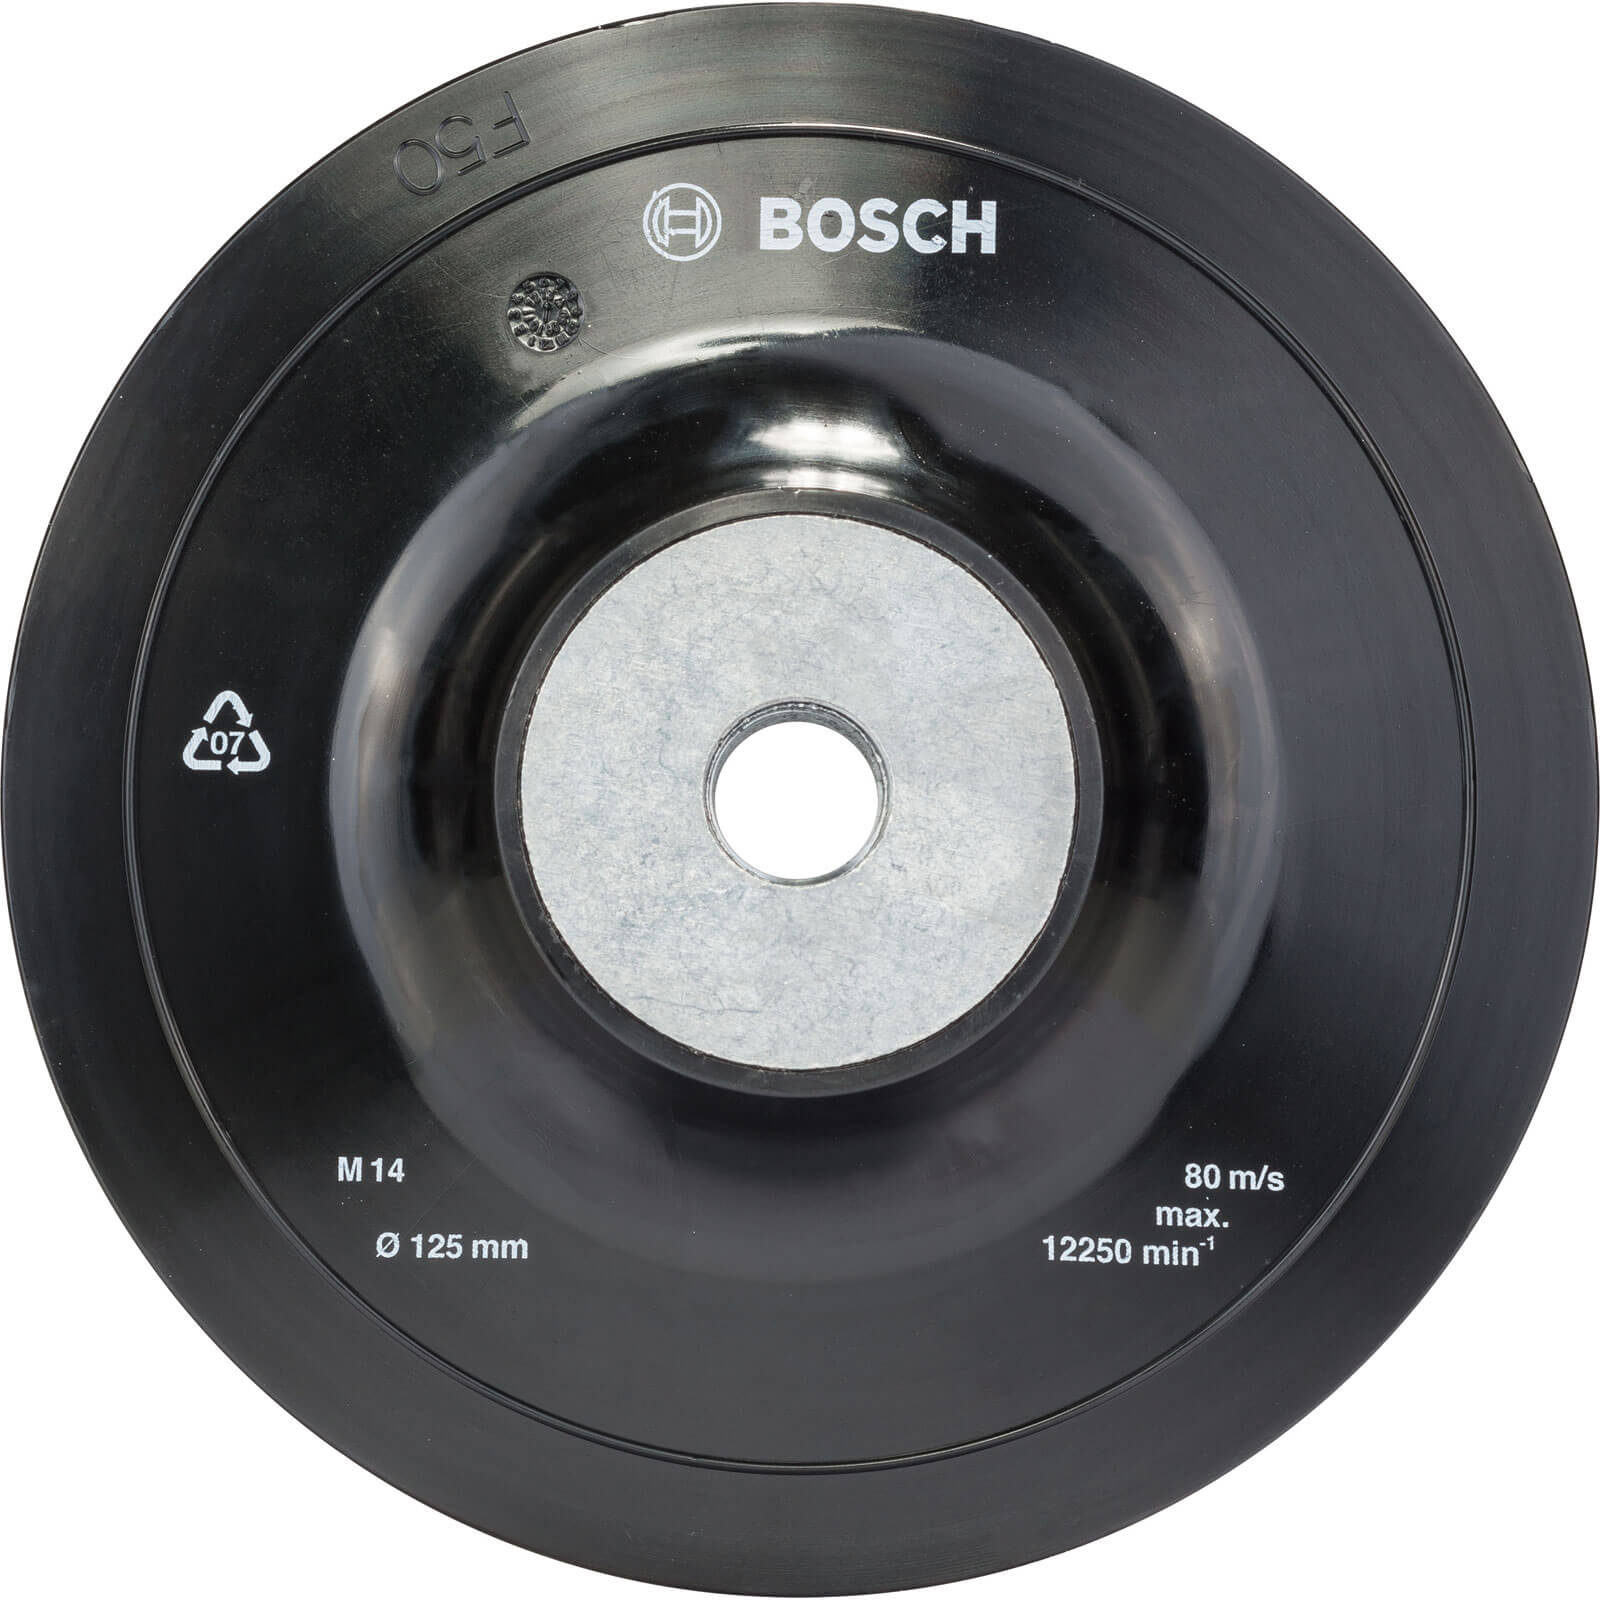 Photo of Bosch M14 Angle Grinder Backing Pad 125mm